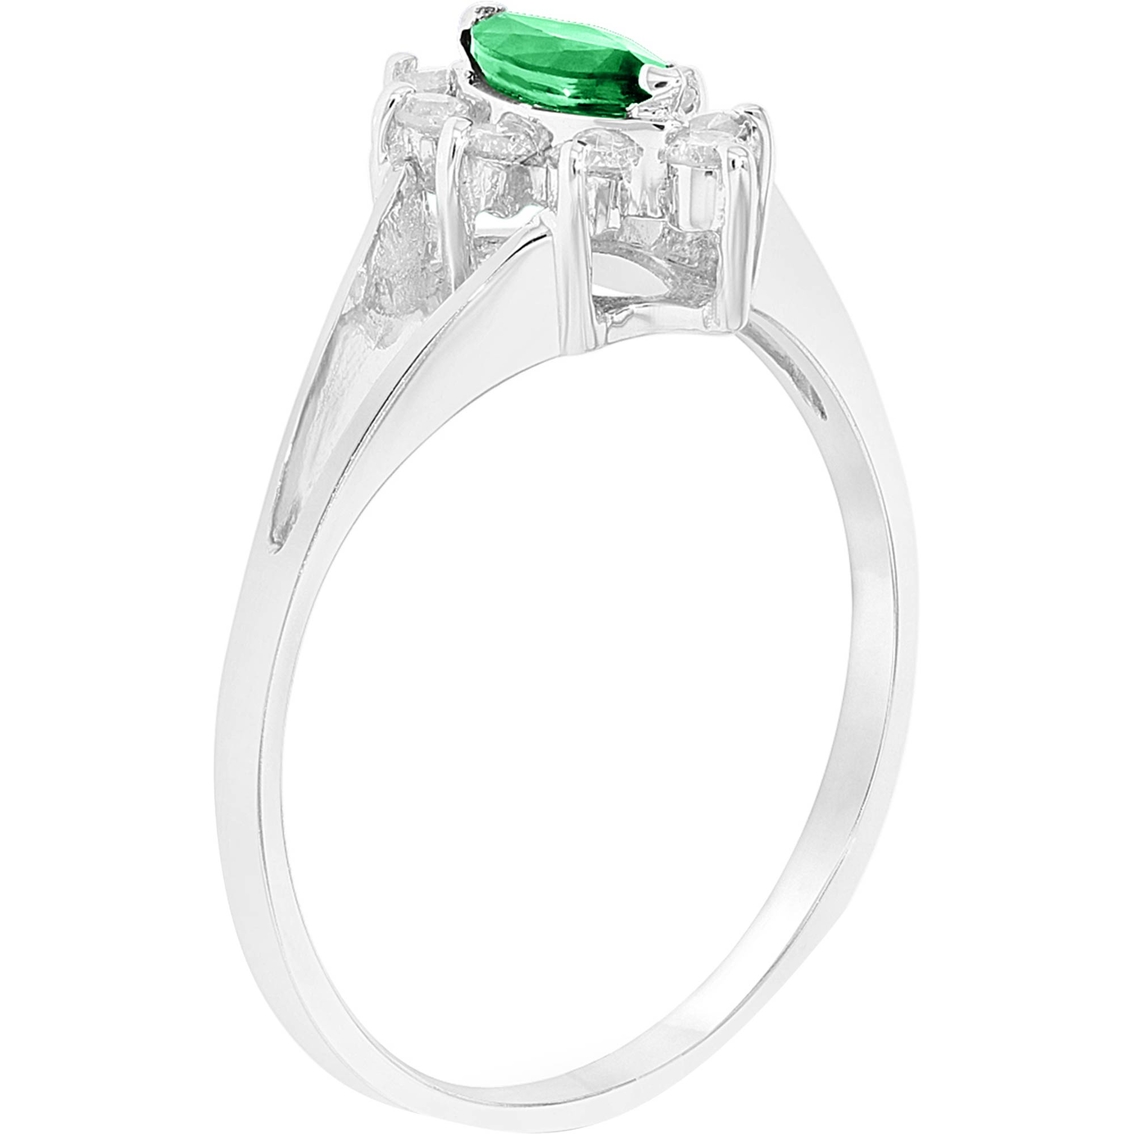 14K White Gold Diamond and 6x3mm Marquis Shaped Emerald Ring - Image 2 of 2